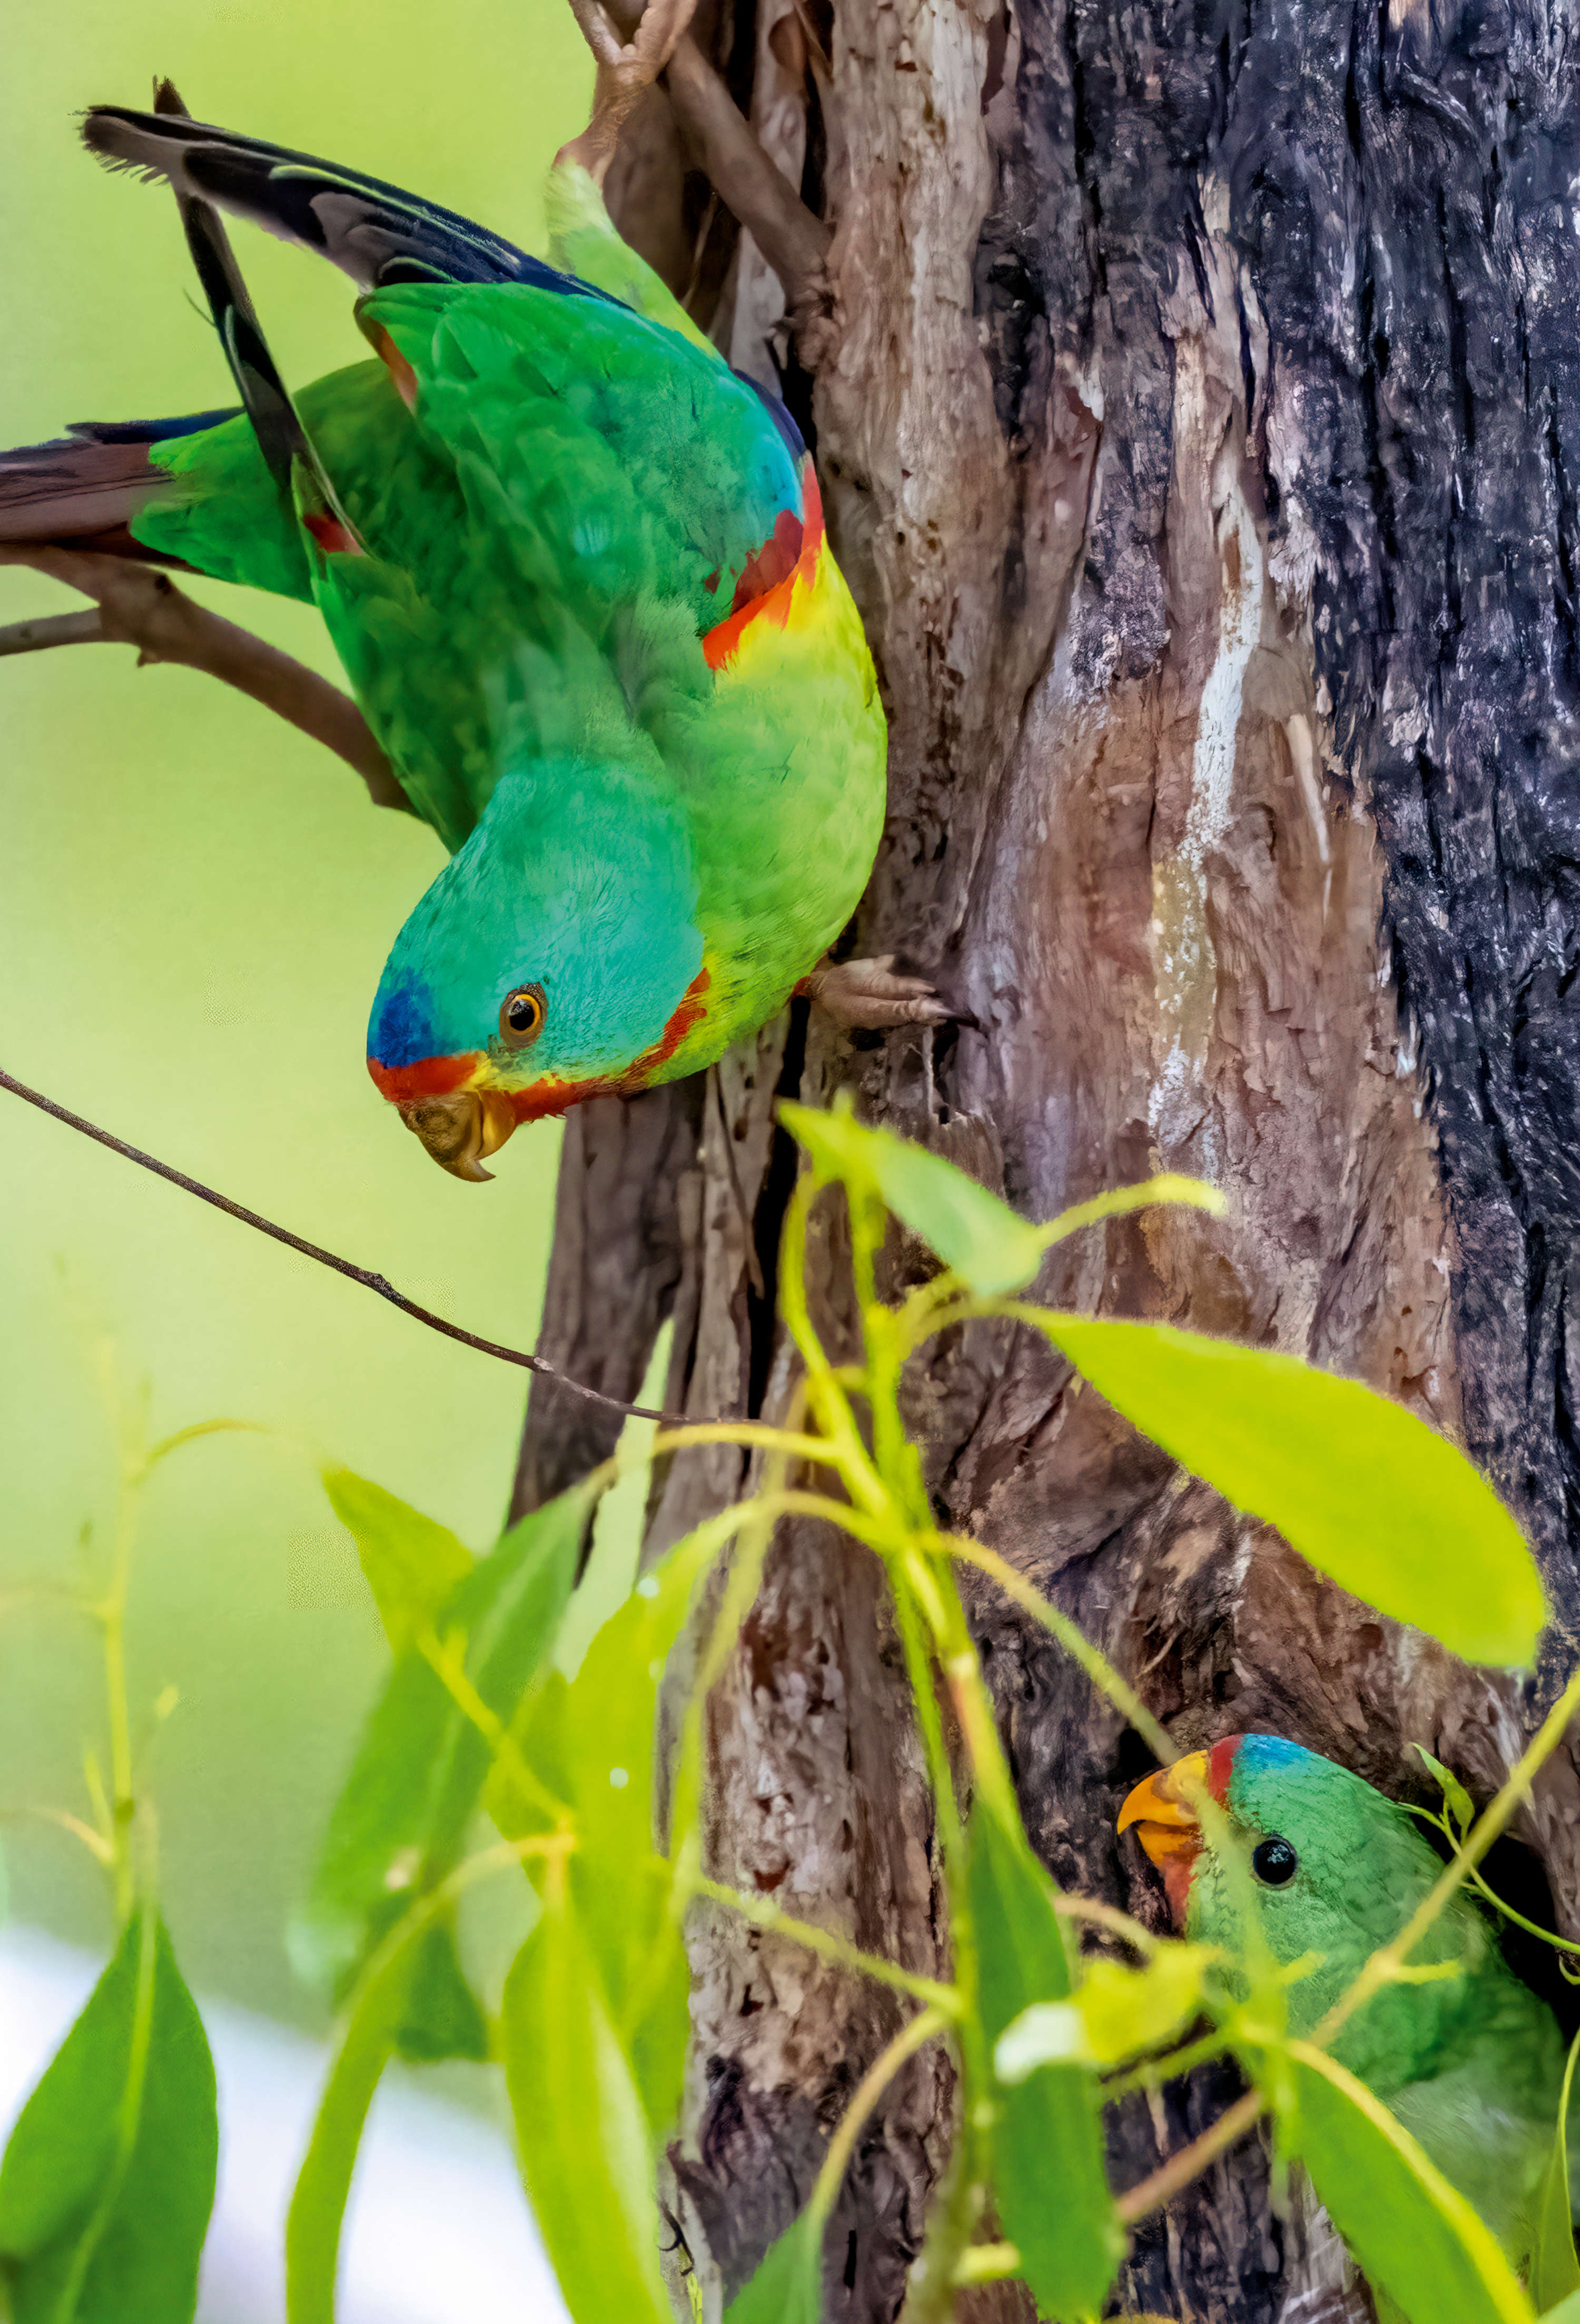 High in a mature eucalyptus tree in the Eastern Tiers, Tasmania, a Swift Parrot adult is feeding its chick. Image by Rob Blakers.